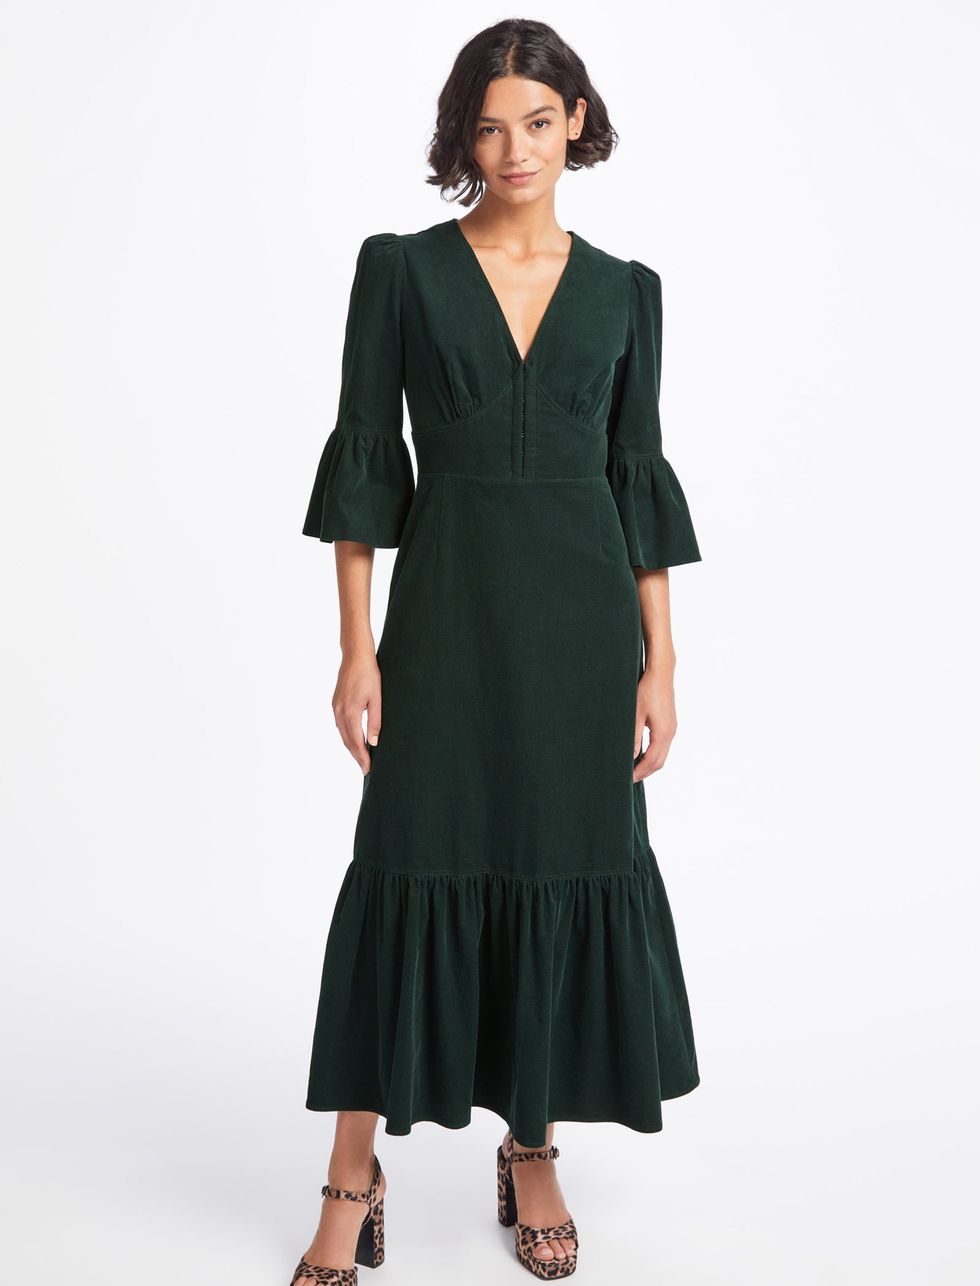 Cefinn's sell-out Daphne dress is finally back in stock